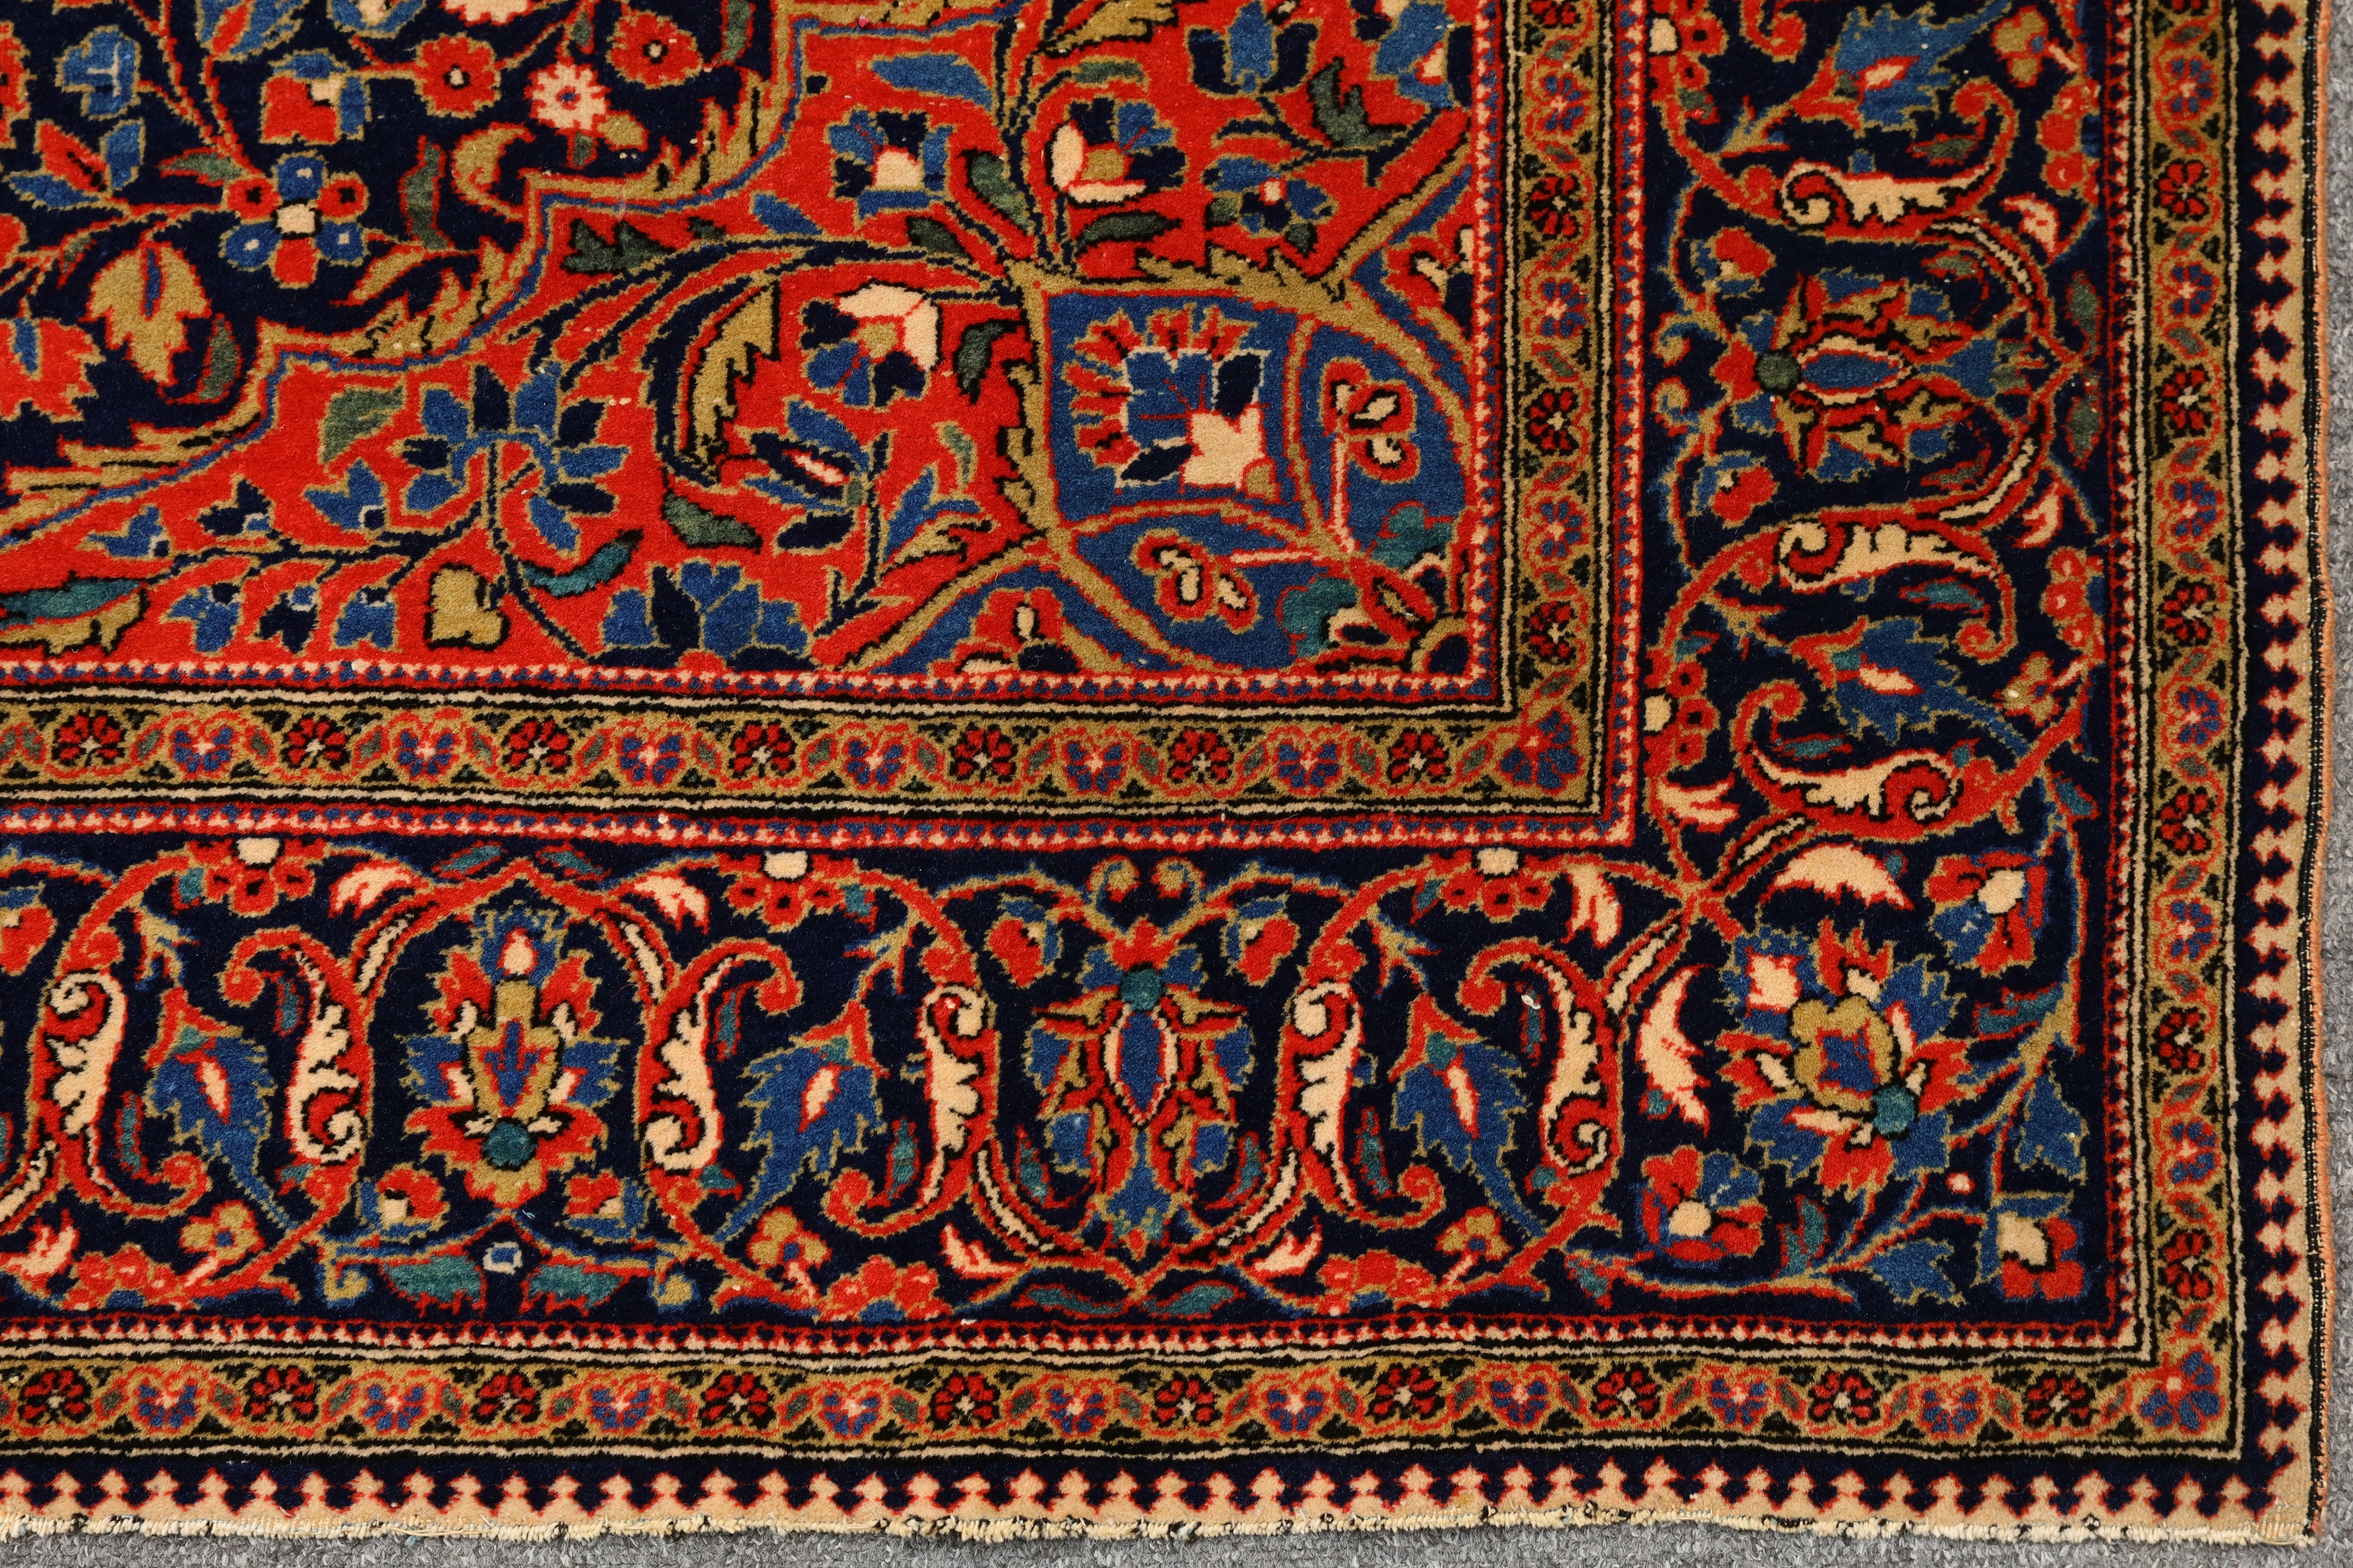 A VERY FINE KASHAN RUG, CENTRAL PERSIA - Image 6 of 7